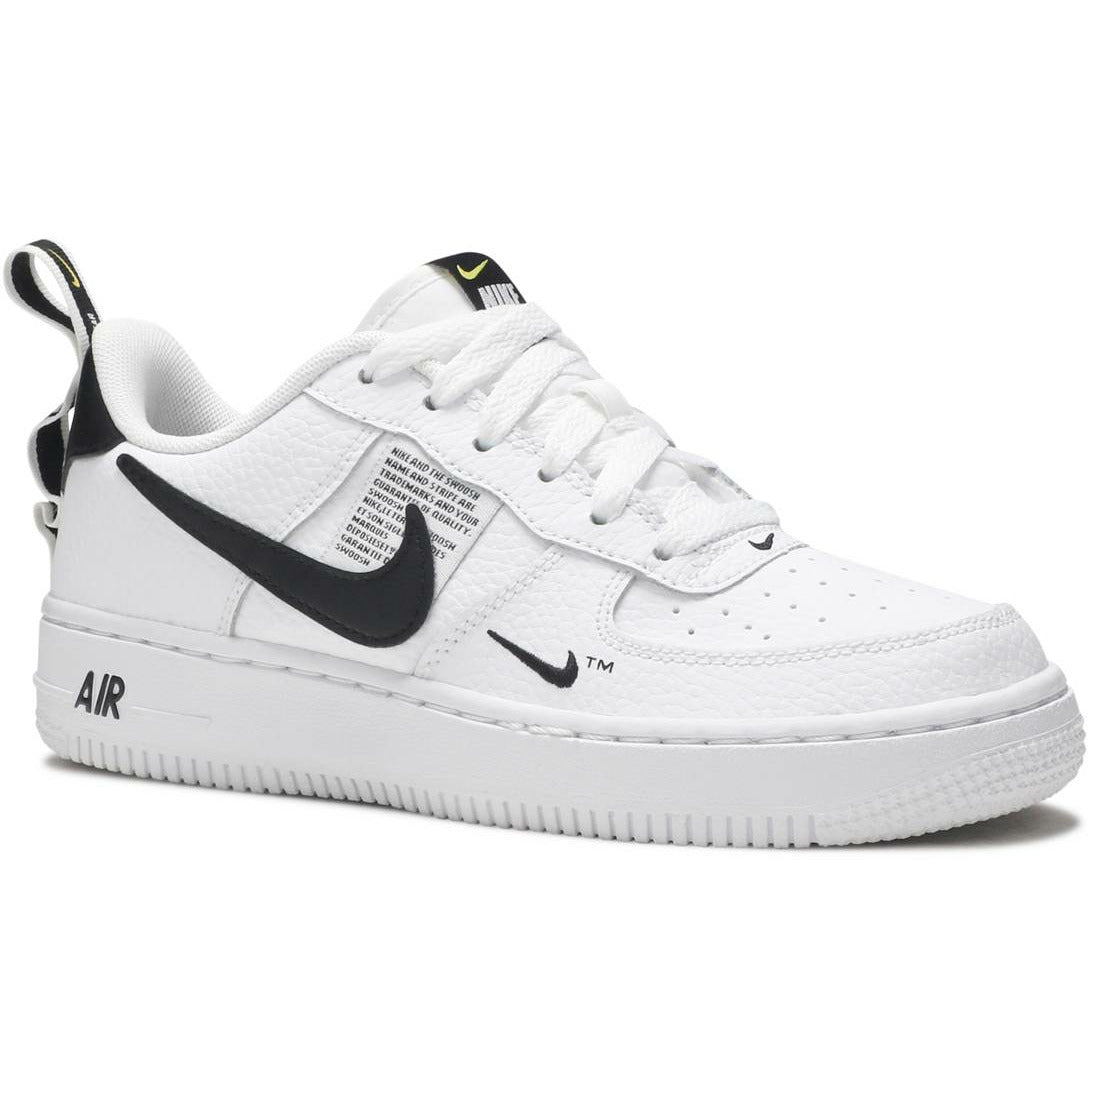 Nike Air Force 1 LV8 Utility GS 'Overbranding', Pakistan